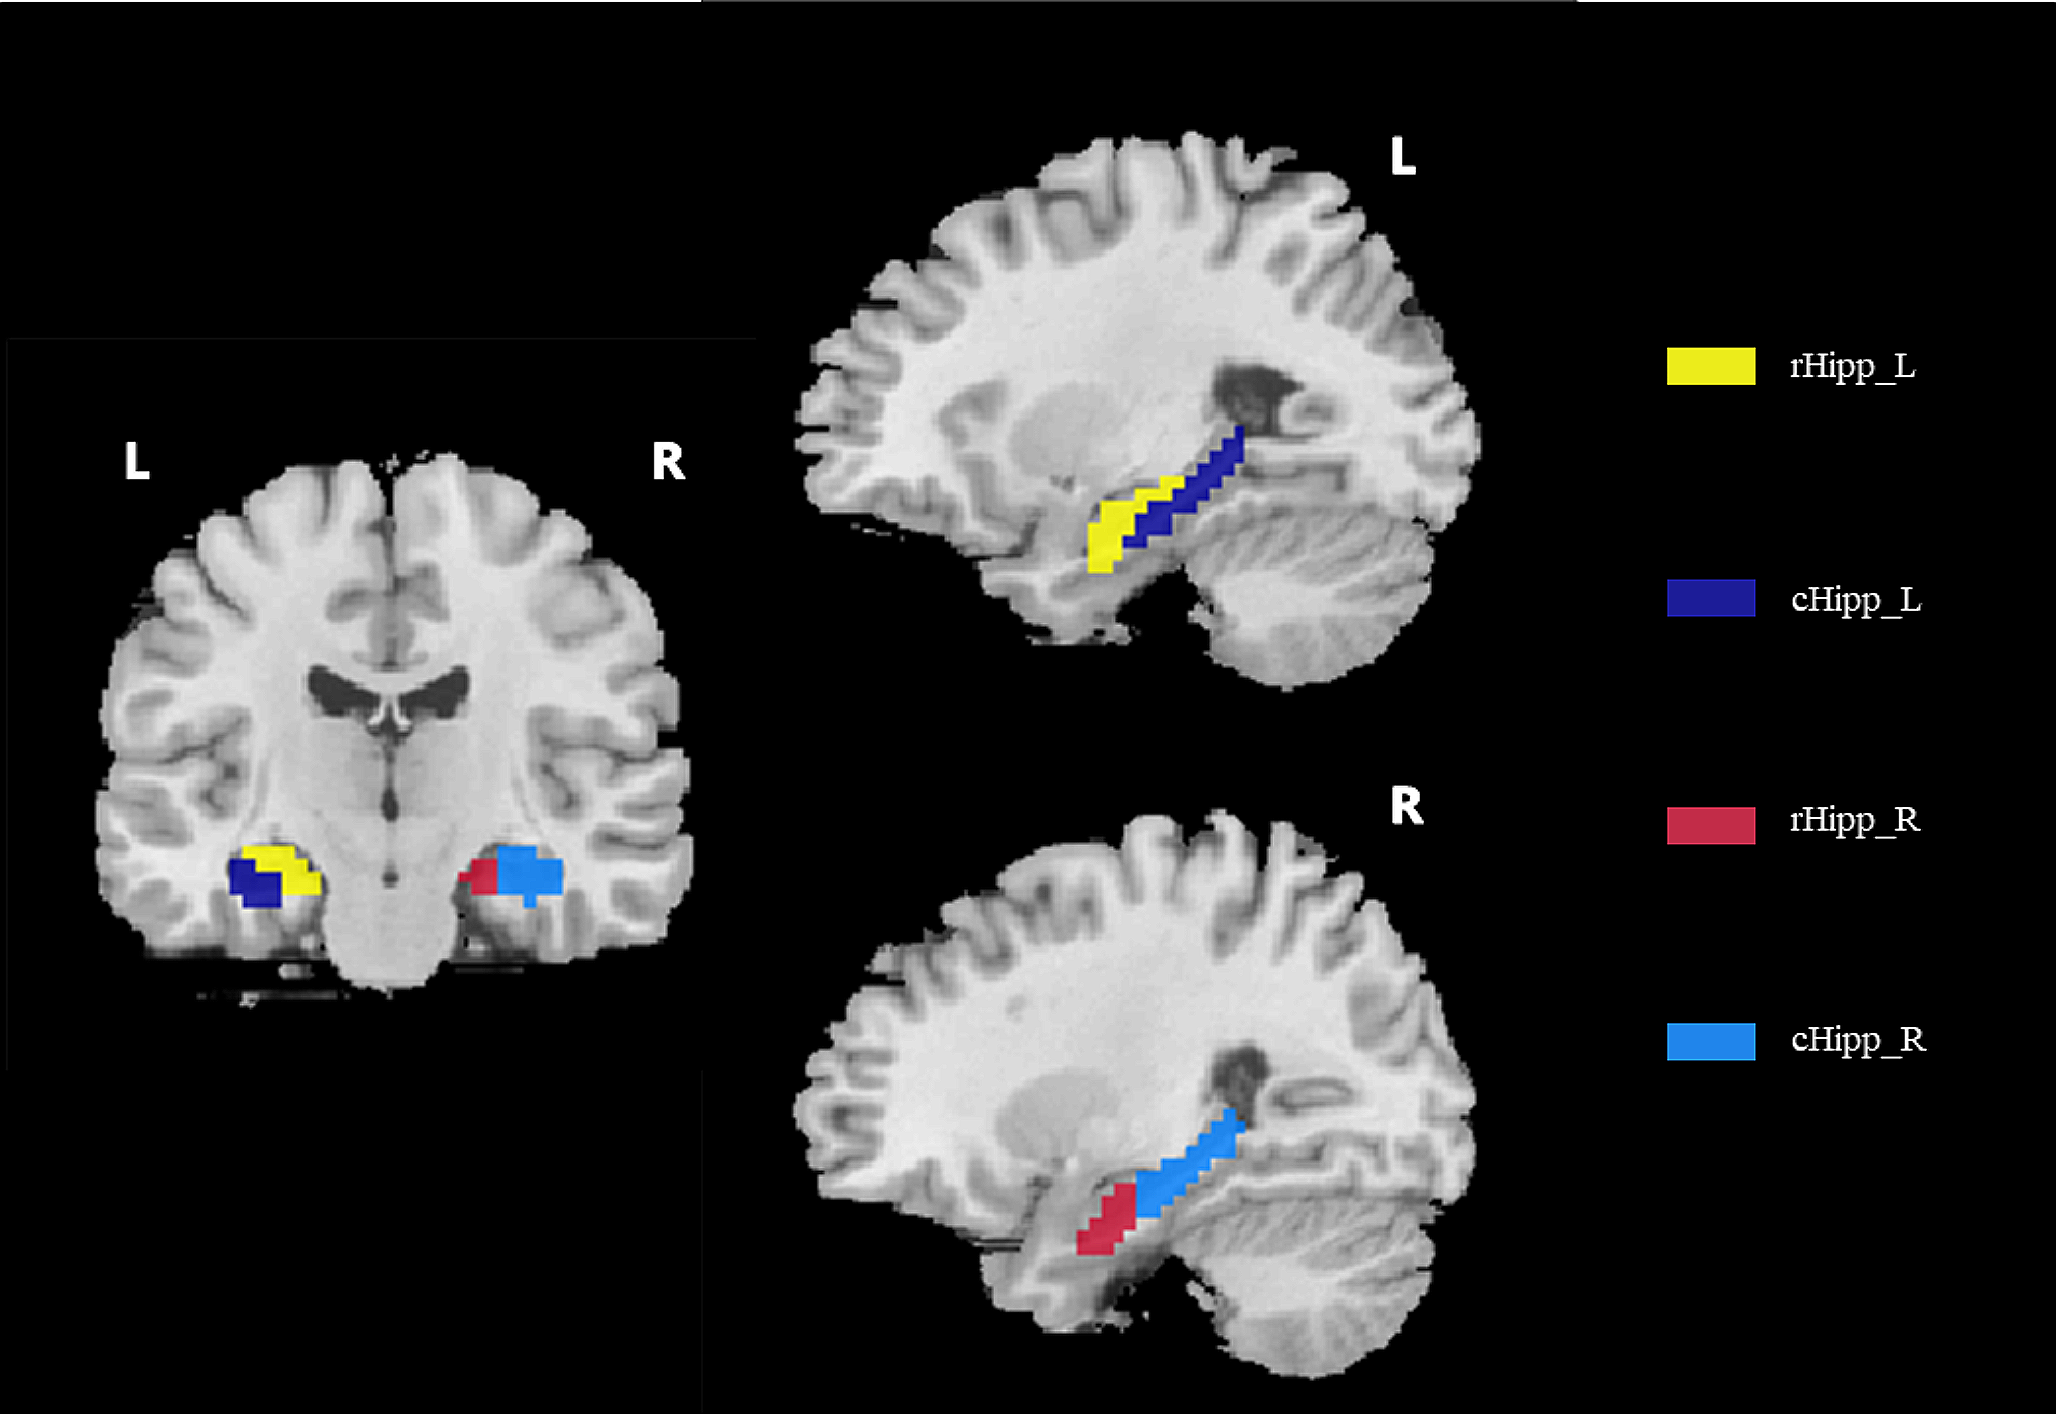 Functional connectivity changes of the hippocampal subregions in anti-N-methyl-D-aspartate receptor encephalitis